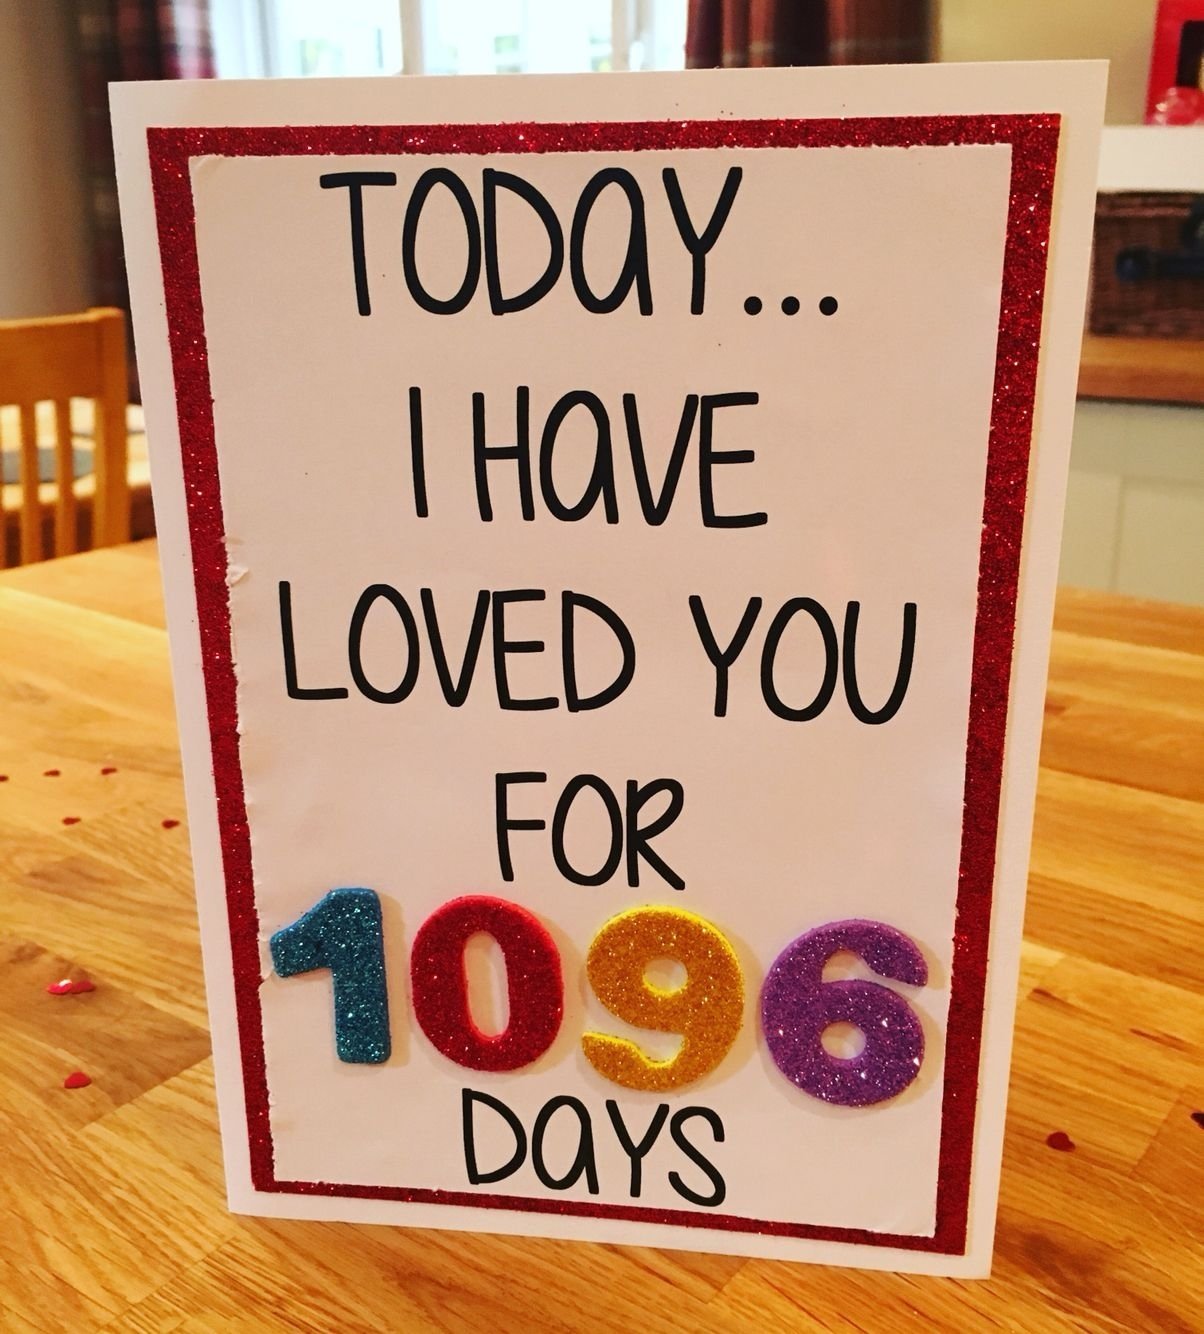 10 Stylish 3 Year Anniversary Gift Ideas For Boyfriend 3 year anniversary card today i have loved you for 1096 days x 1 2022